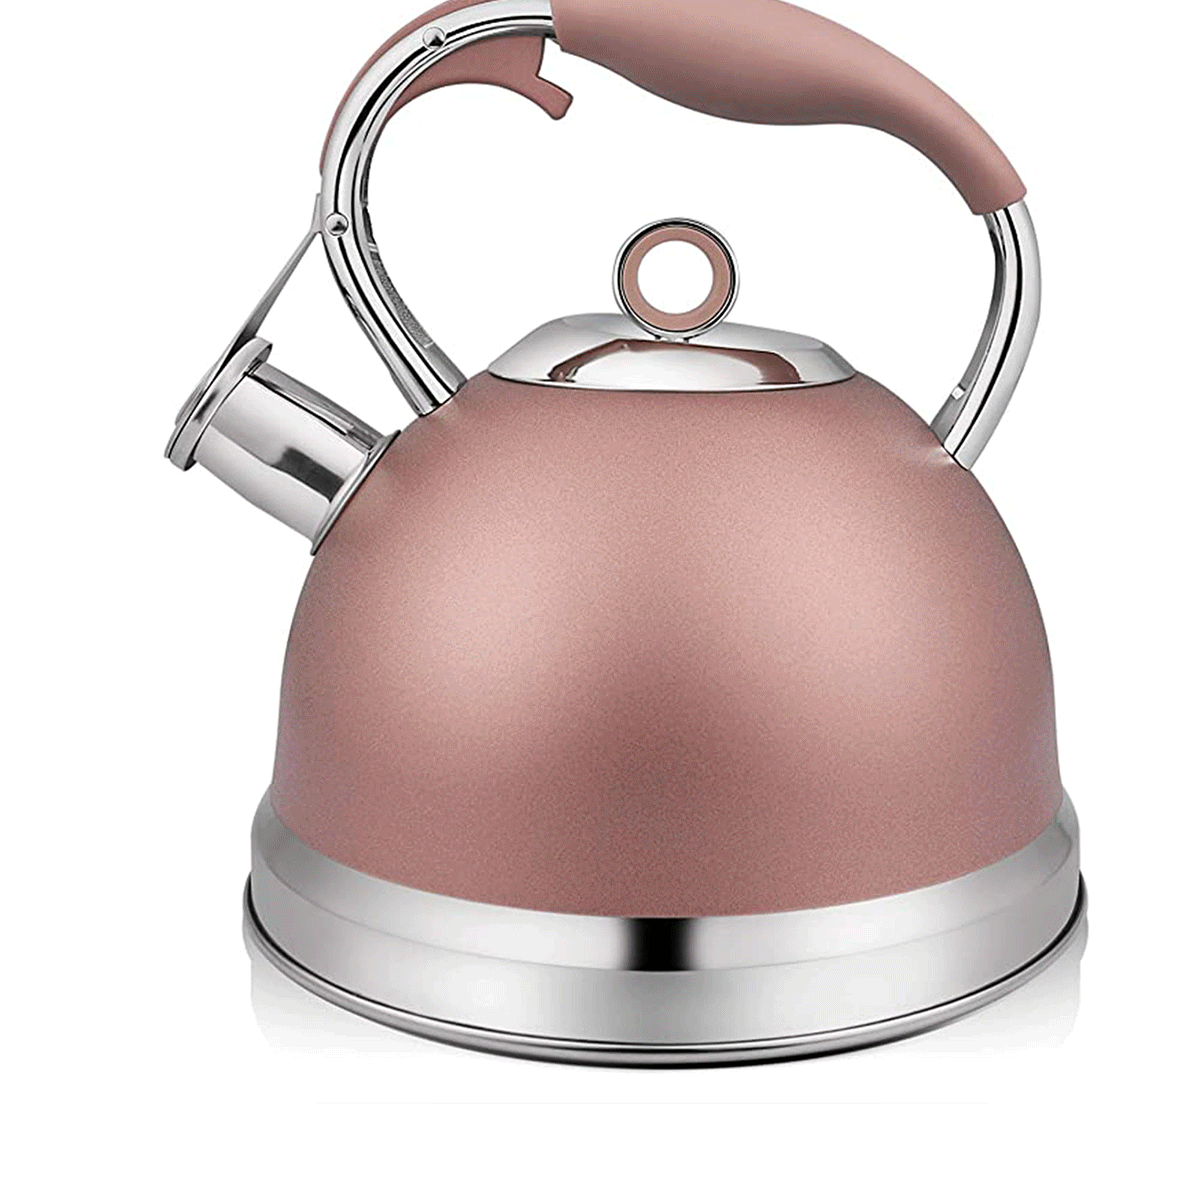 Portable Tea Kettle Stovetop Whistling Teakettle 2L Tea Kettles Reusable Stainless Steel Teapot with Heat Proof Handle Suitable for Various Stovetop 724 Color : White 